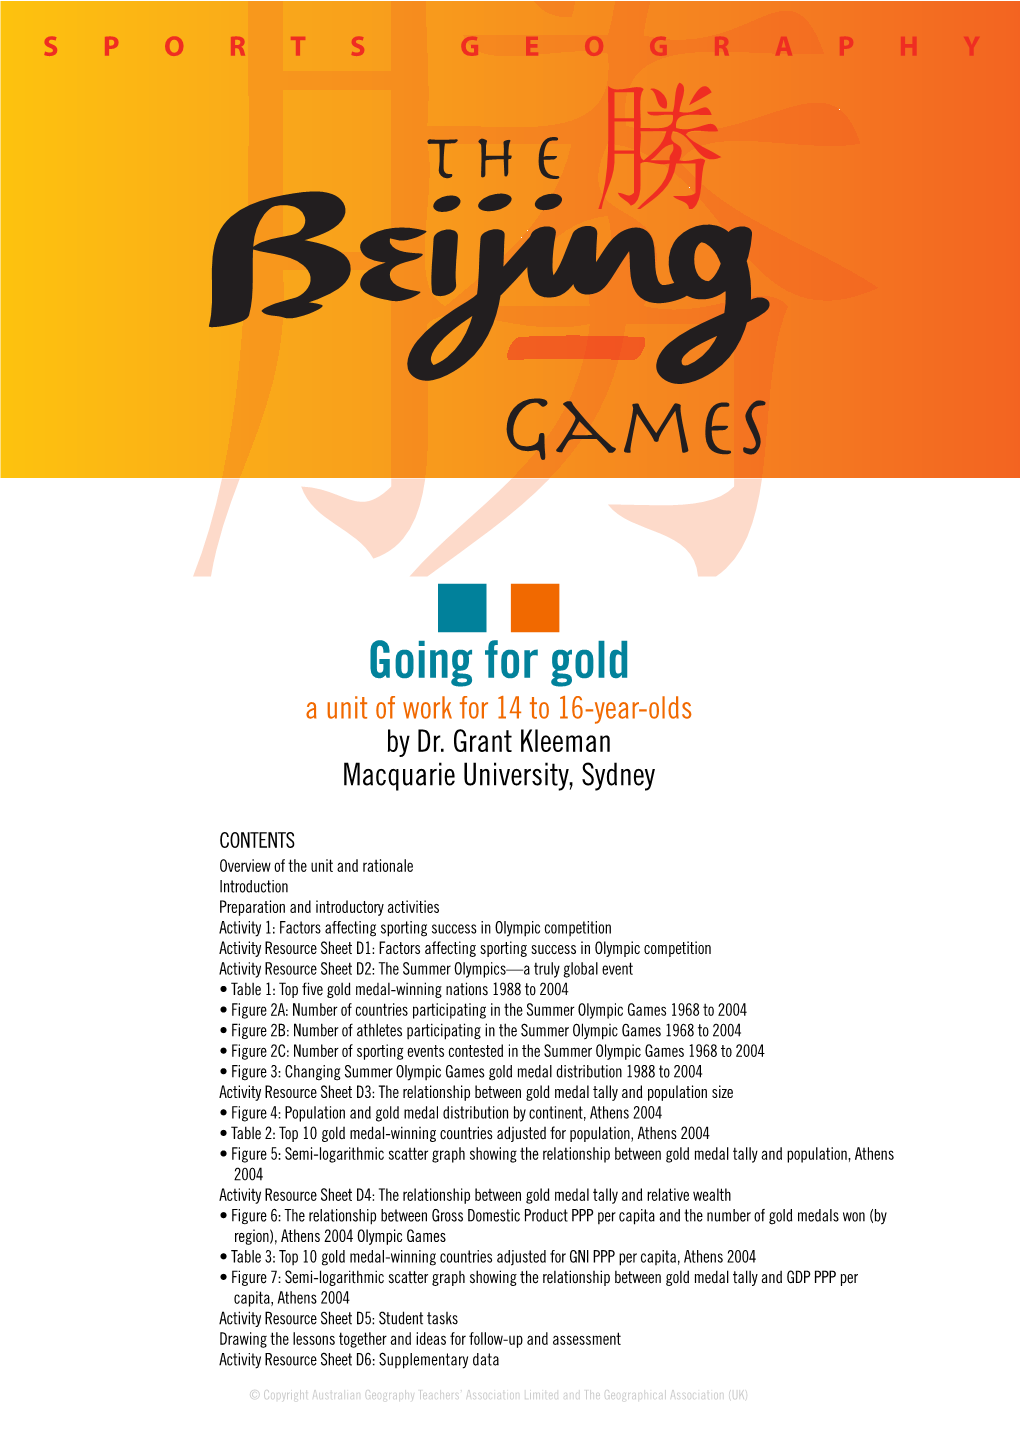 Going for Gold a Unit of Work for 14 to 16-Year-Olds by Dr